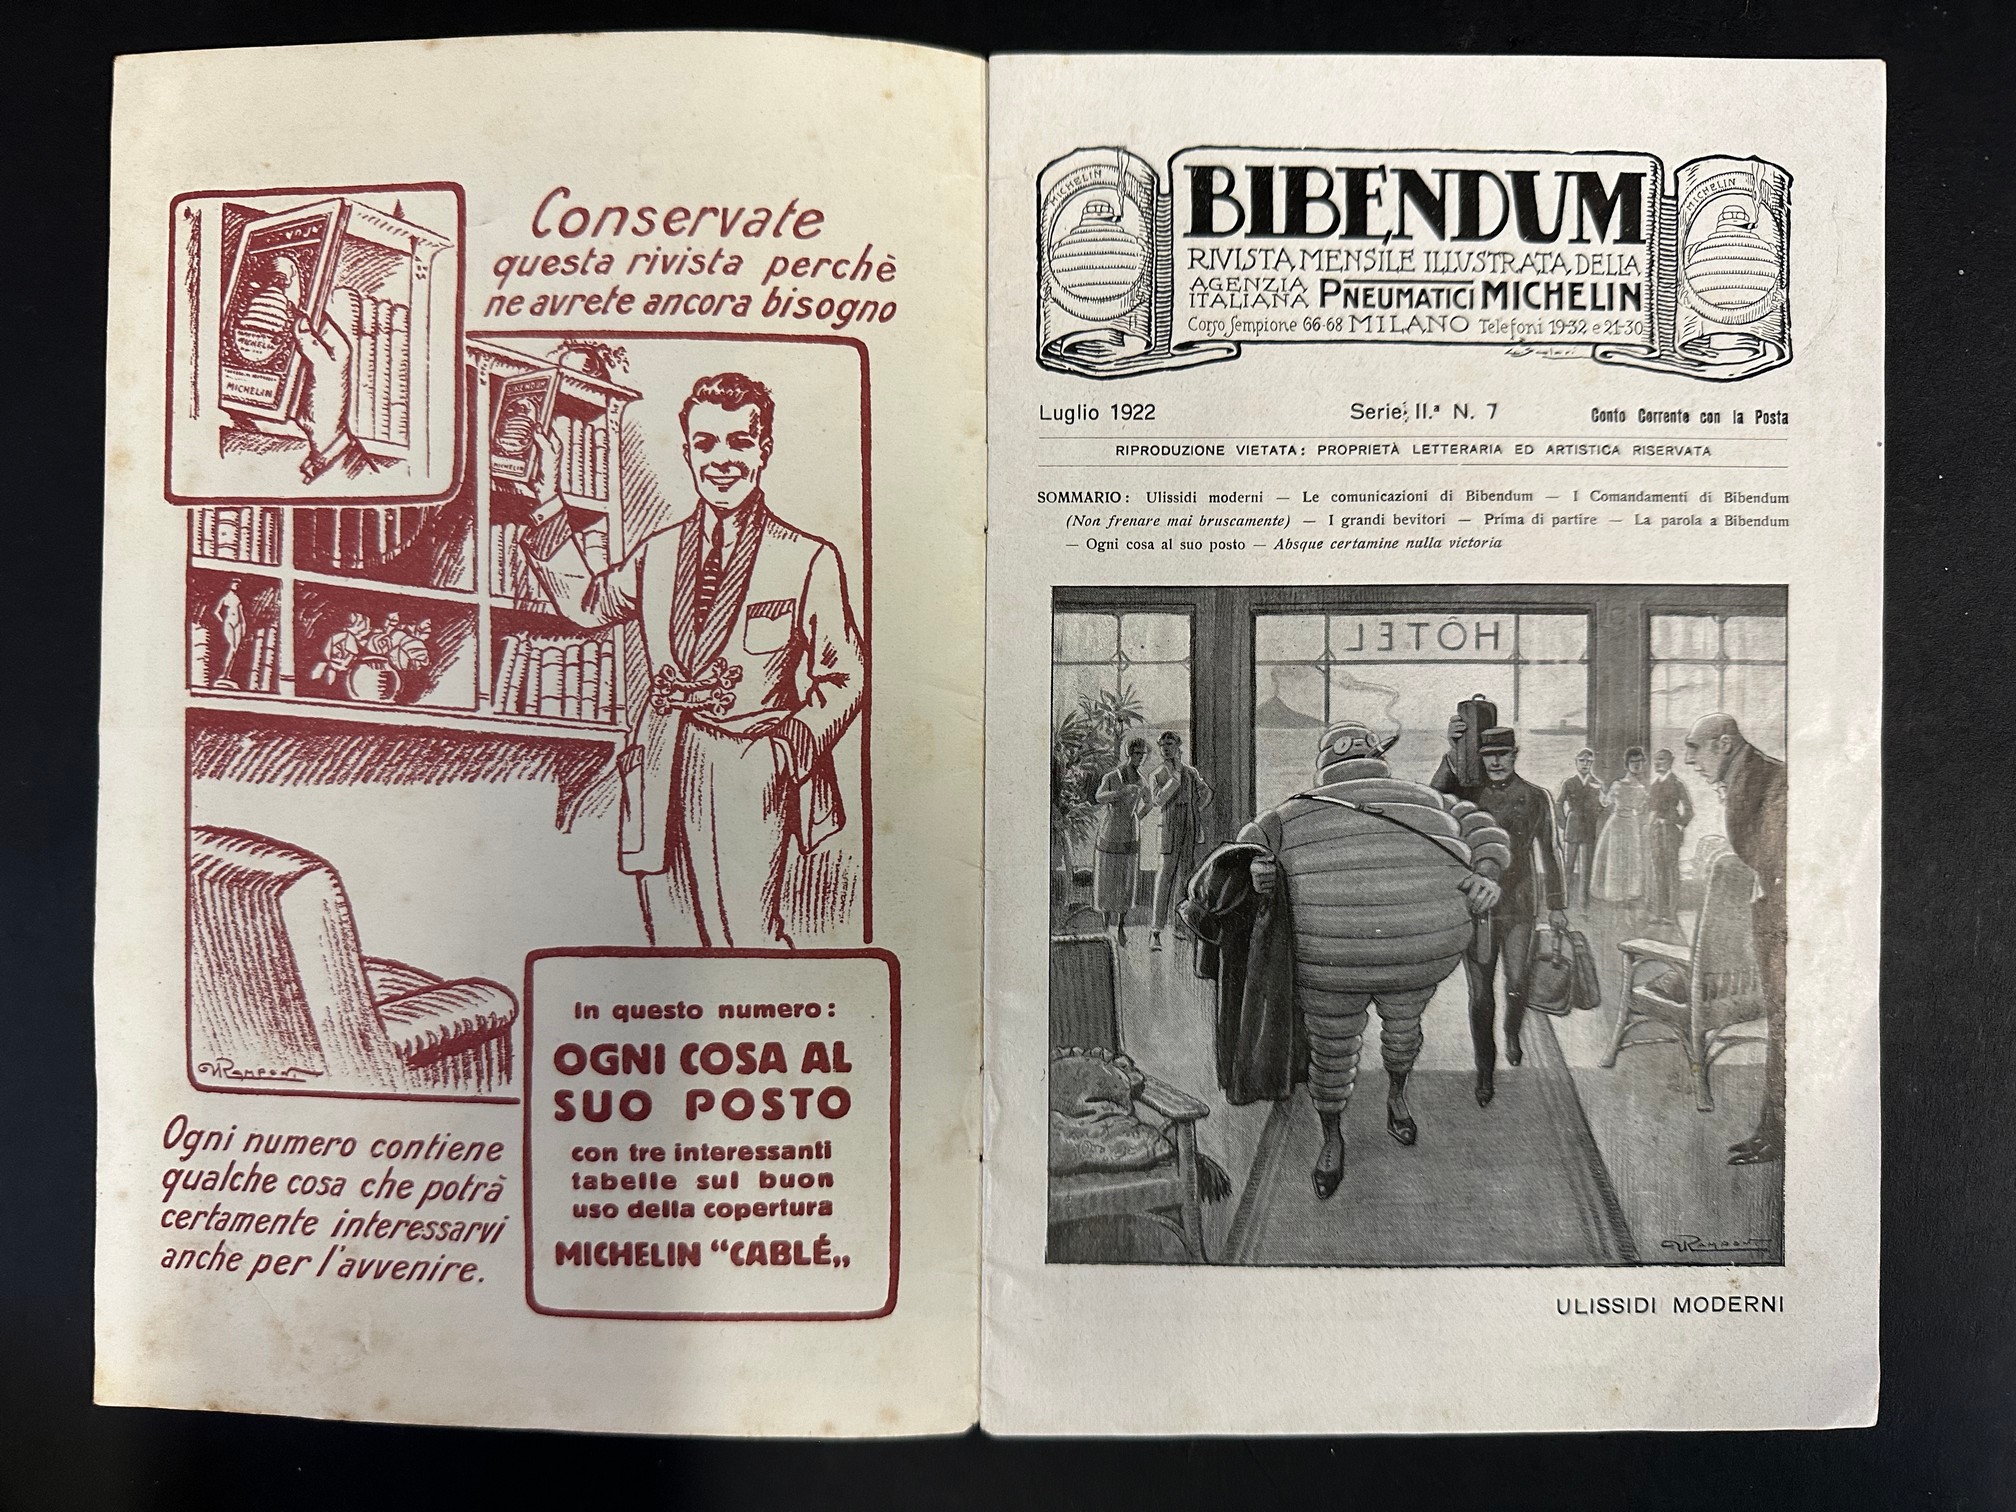 A rare Michelin publication titled 'Bibendum', dated 1922, beautifully illustrated throughout. - Image 2 of 10